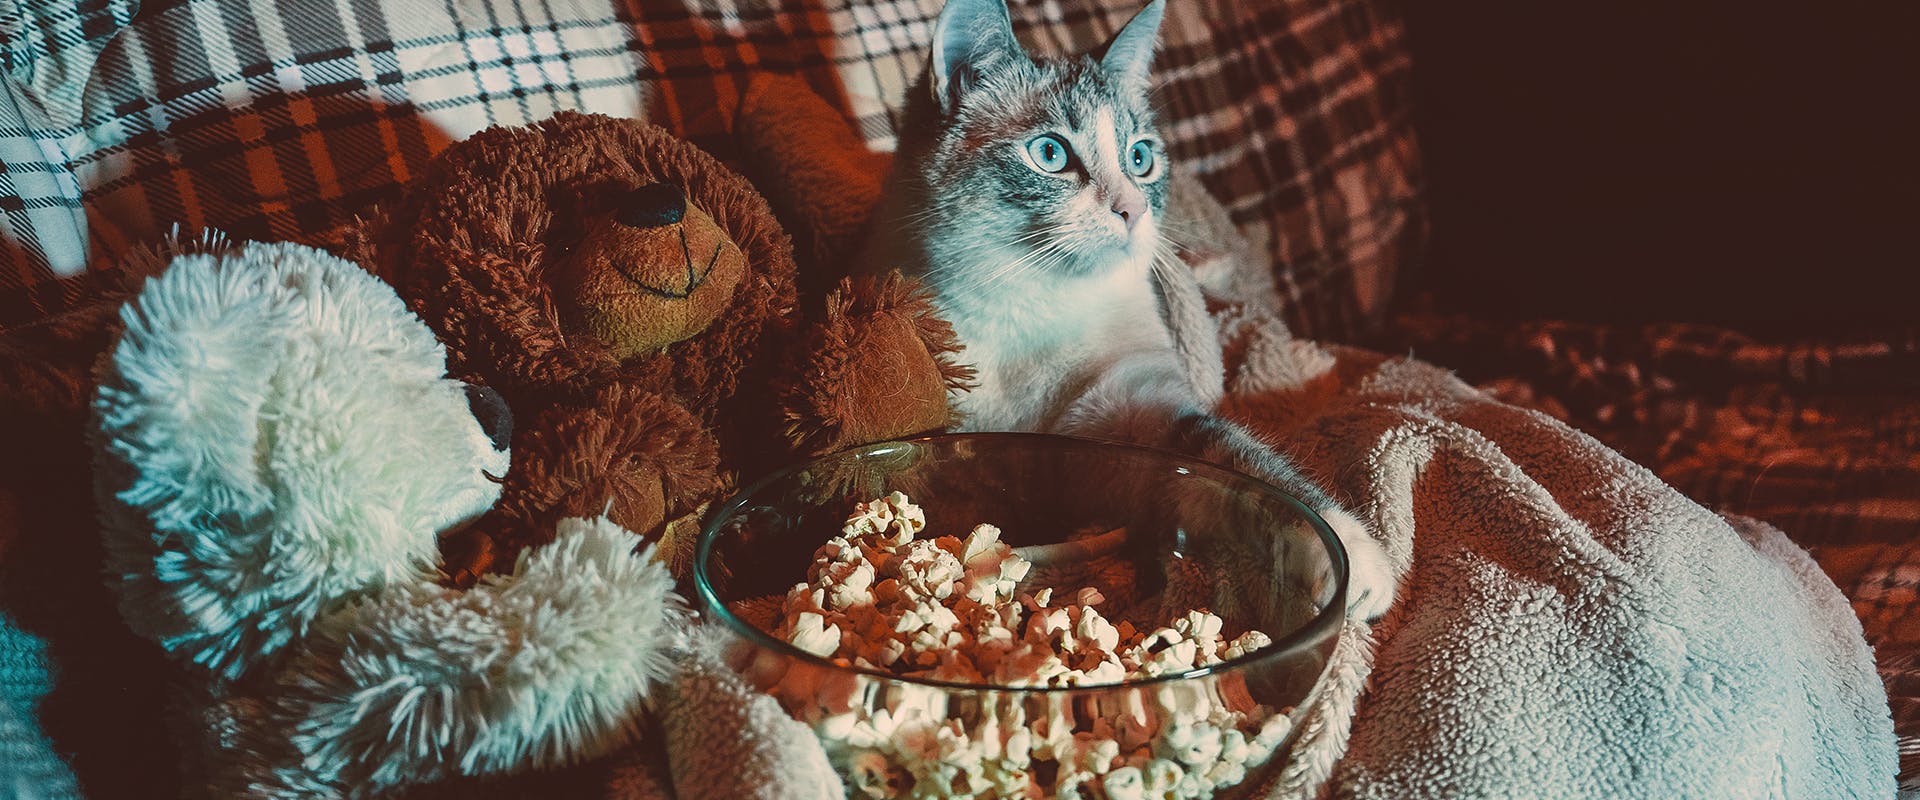 A cat sat on a sofa next to some blankets, a teddy, and a bowl of popcorn